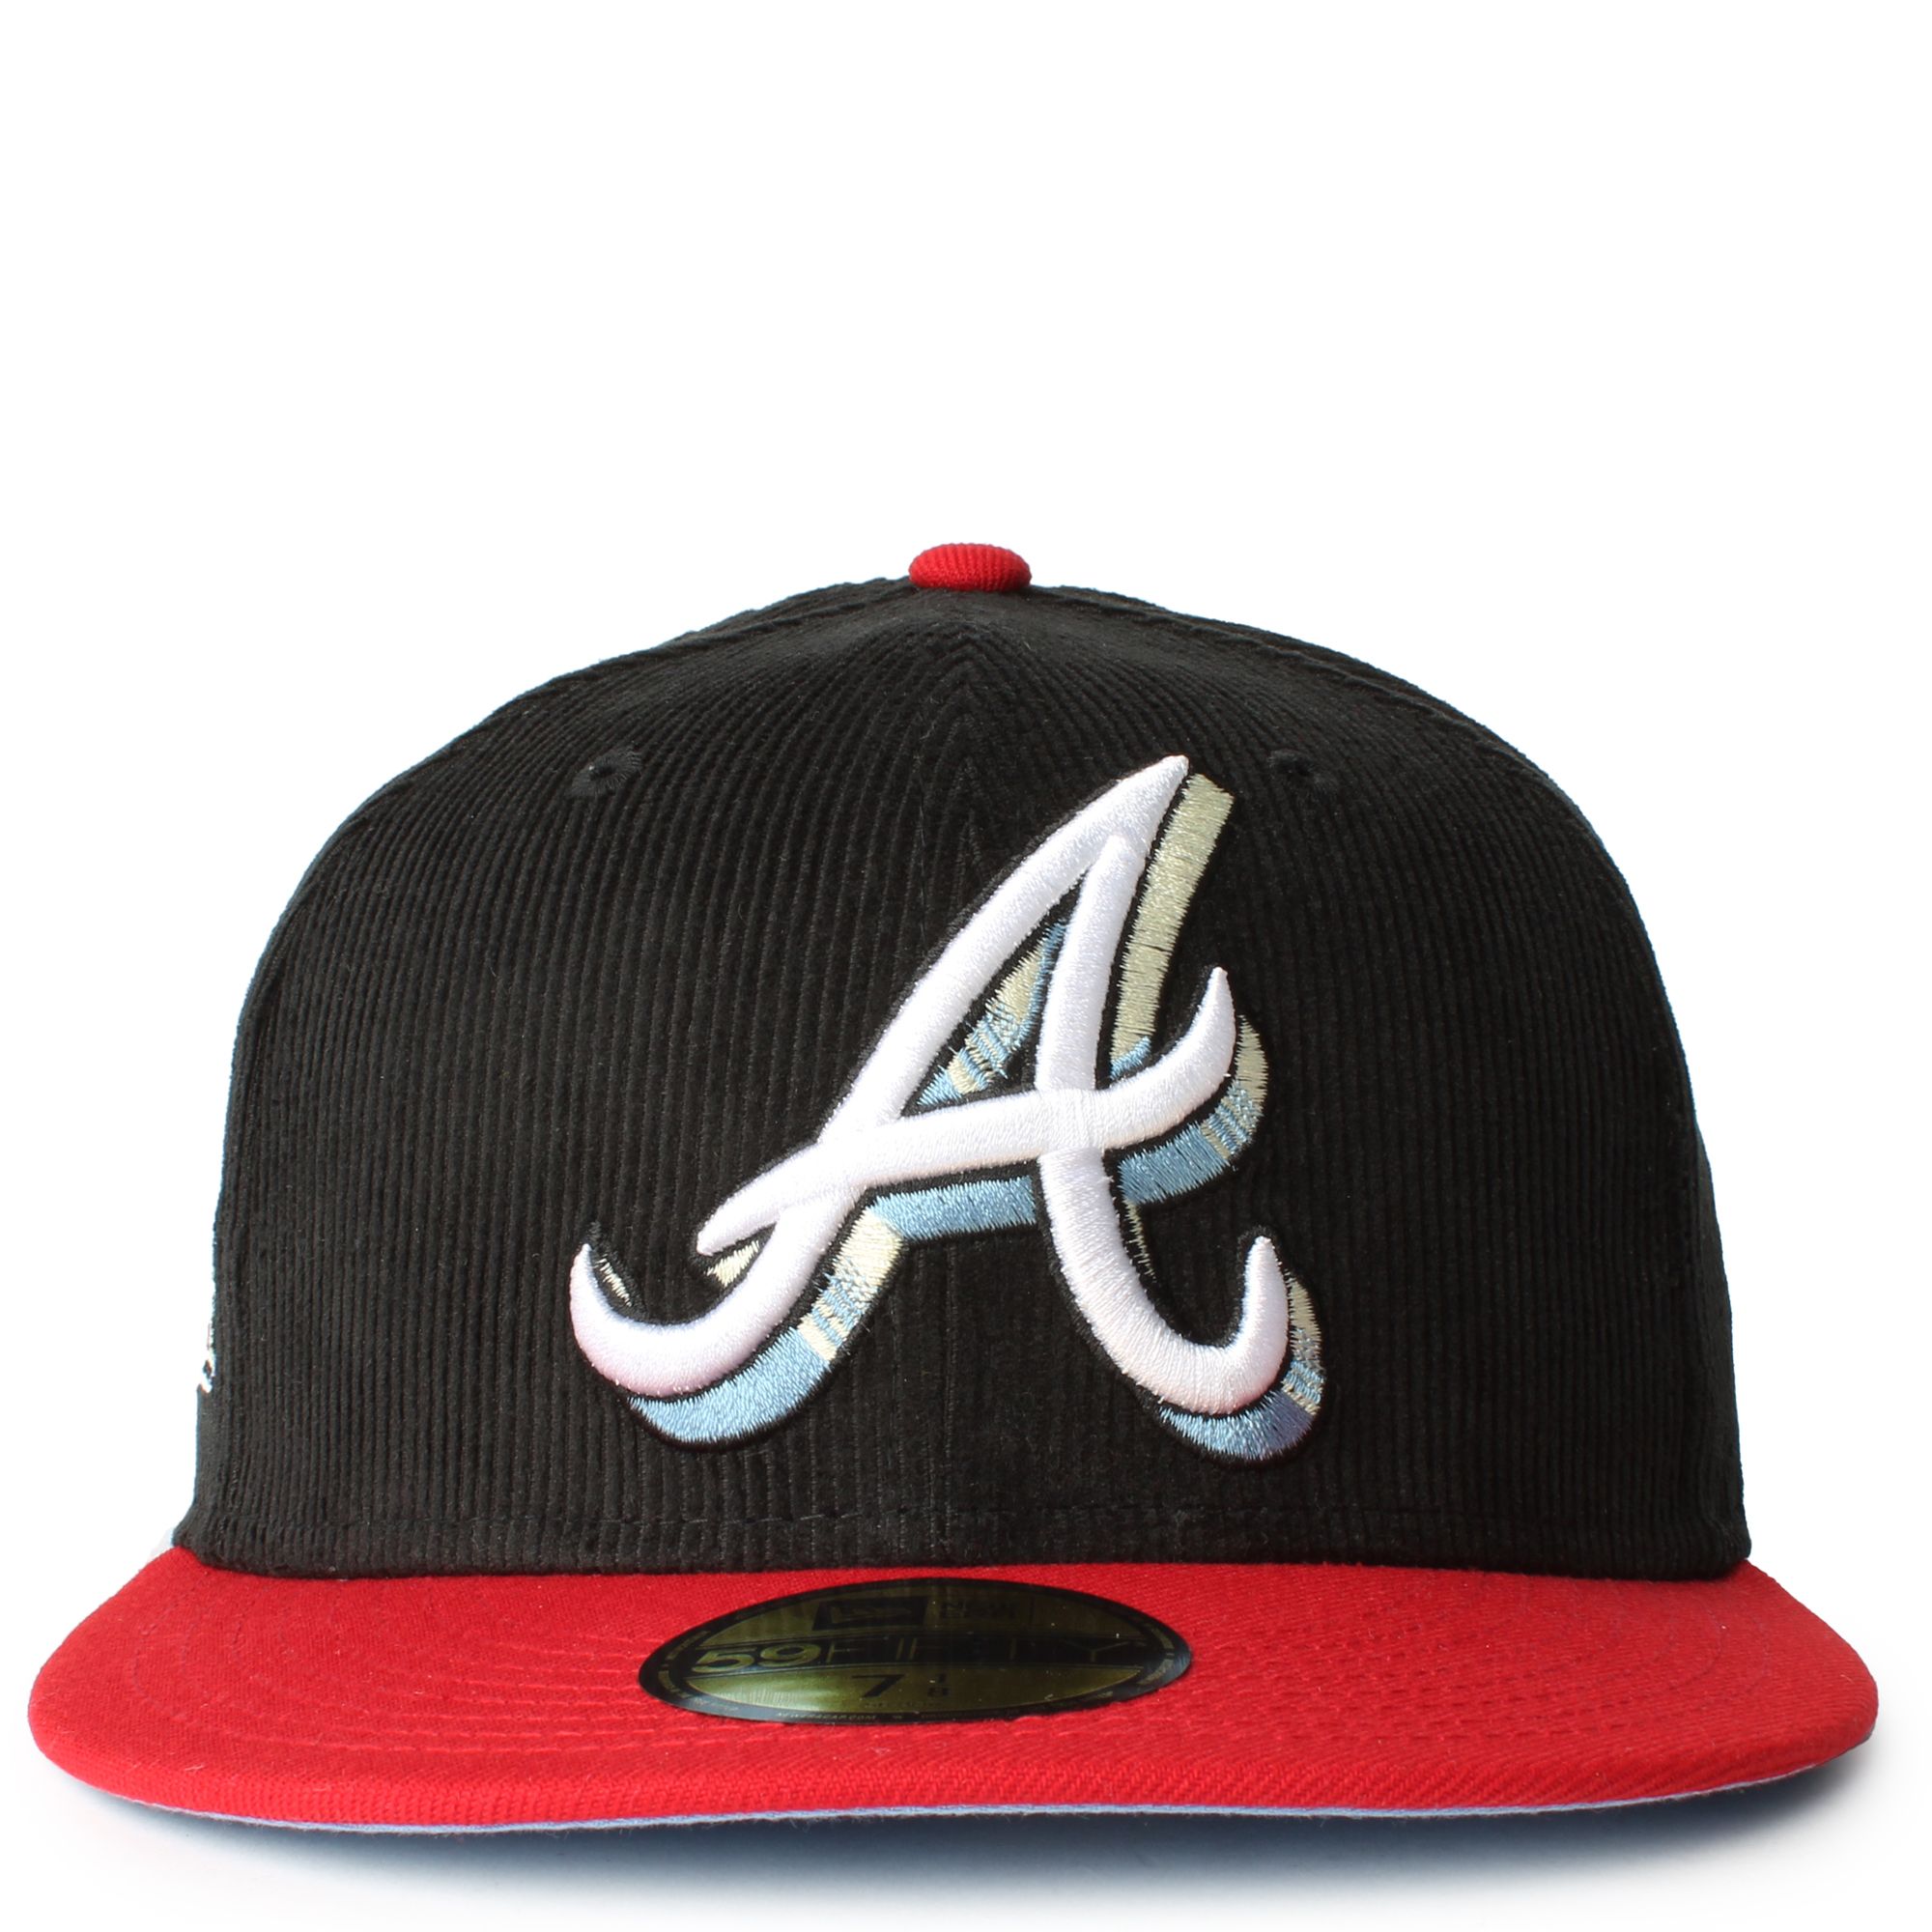 New Era Caps Atlanta Braves 59FIFTY Corduroy Fitted Hat Black/Red